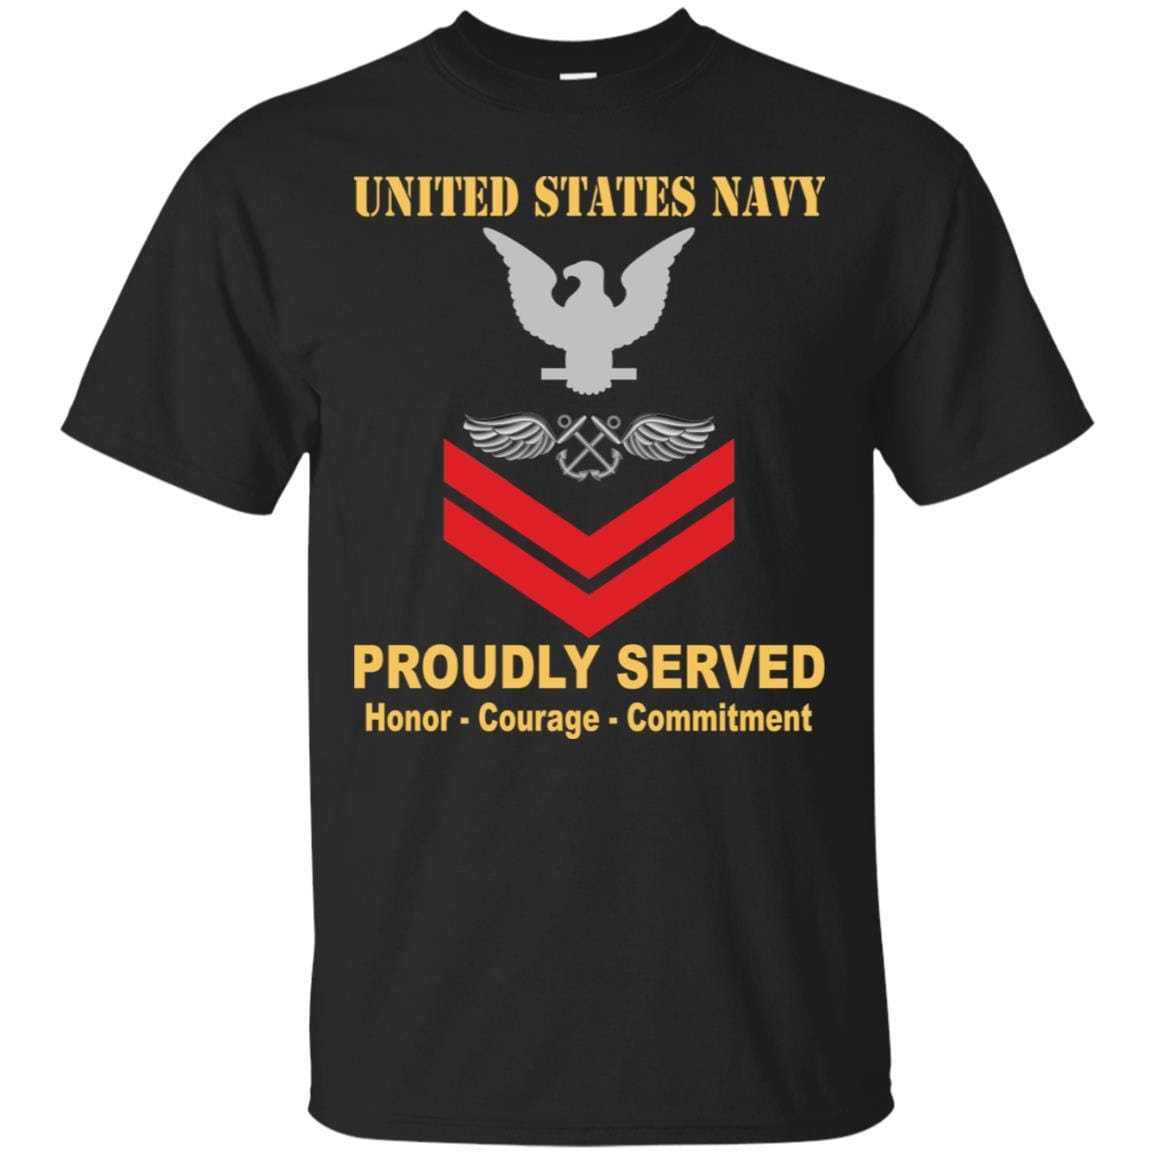 U.S Navy Aviation Boatswain's Mate Navy AB E-5 Rating Badges Proudly Served T-Shirt For Men On Front-TShirt-Navy-Veterans Nation